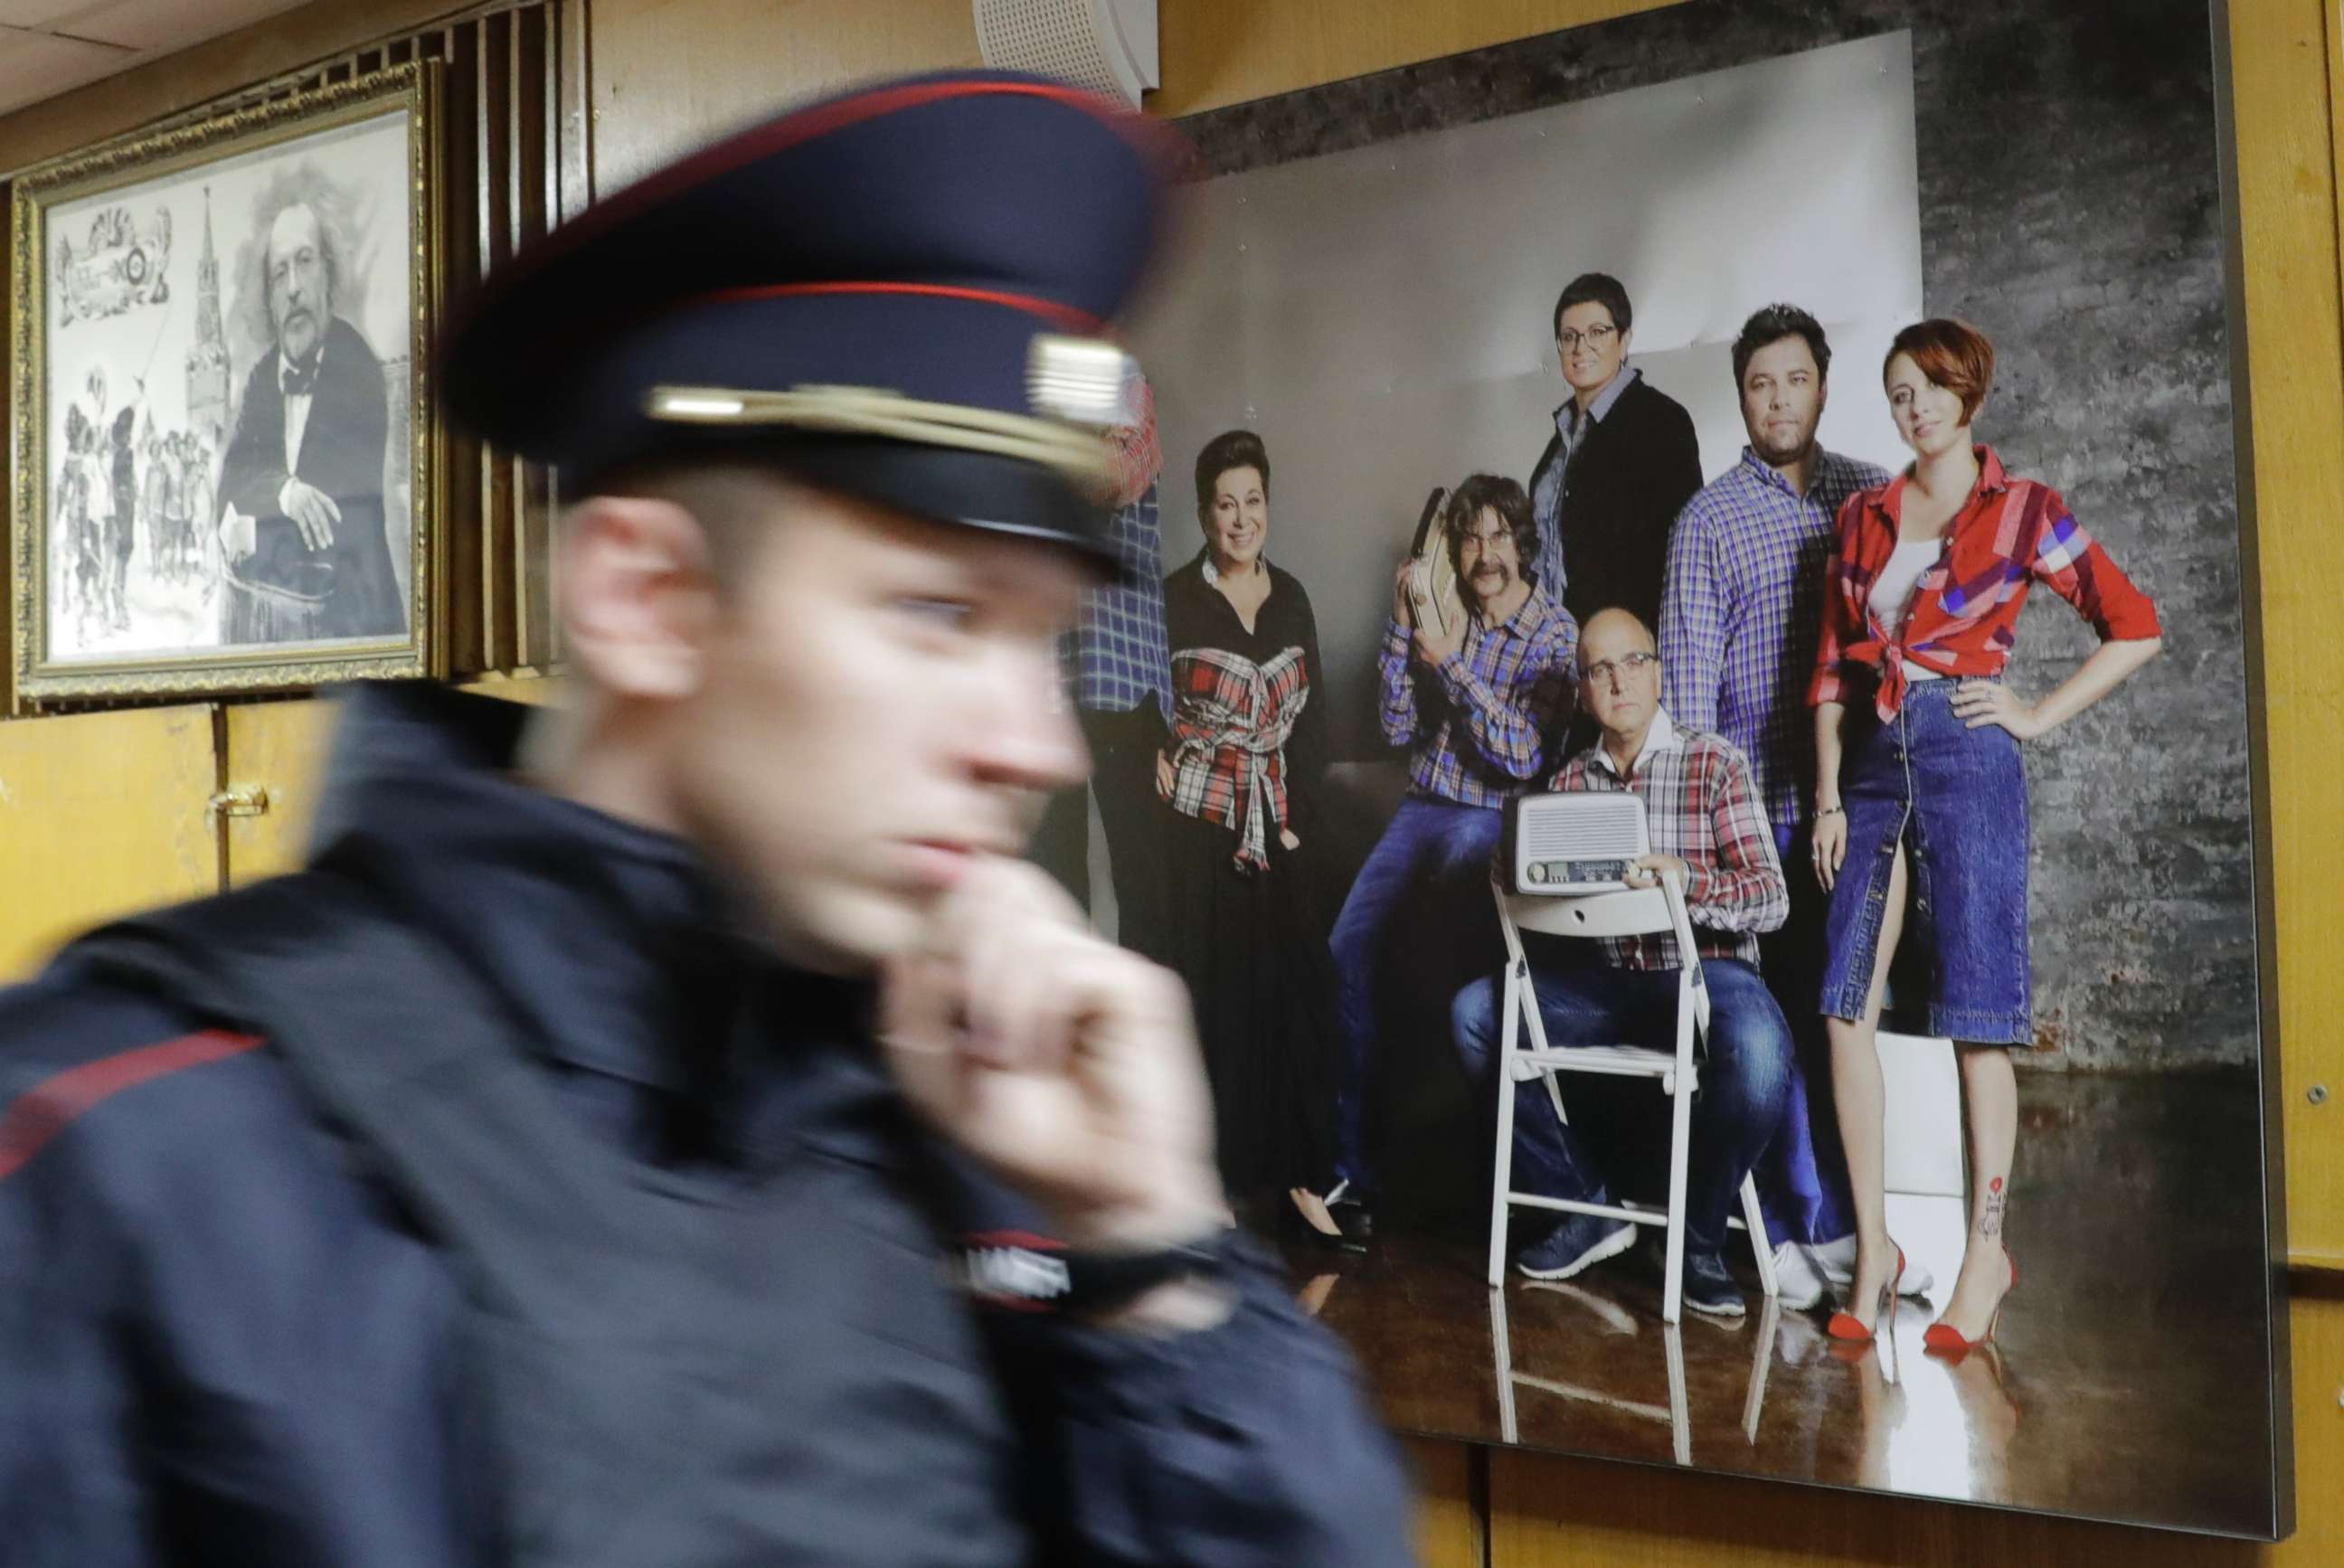 PHOTO: A policeman walks past a photograph showing the employees of Russian radio station Ekho Moskvy, including anchor Tatiana Felgengauer, right, at the station's office in Moscow, Oct. 23, 2017.